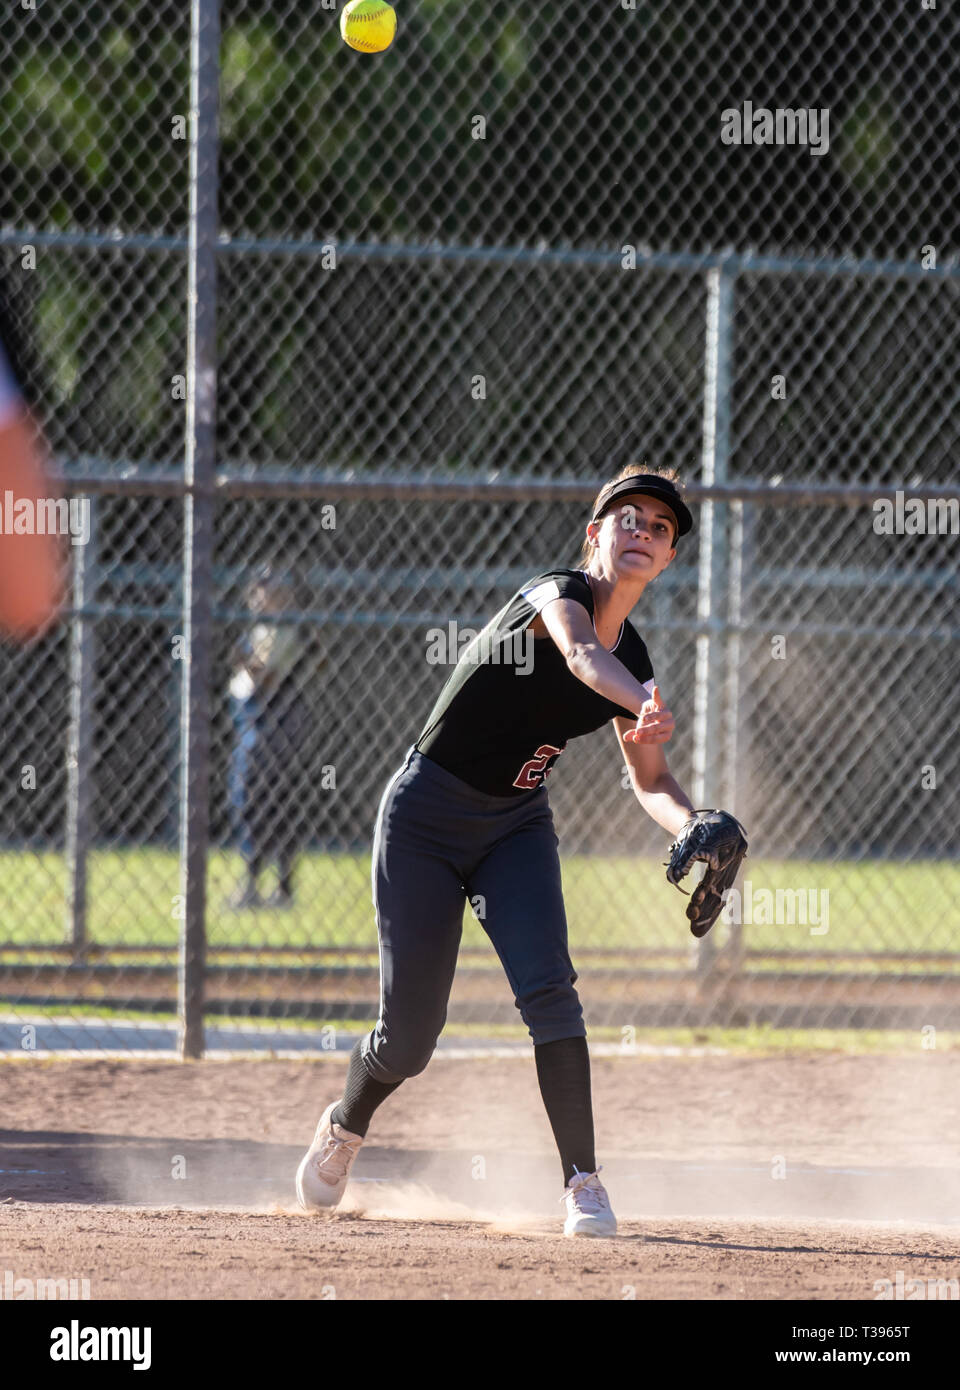 Female teenage softball player in black uniform throwing ball across infield for the out in a cloud of dust. Stock Photo